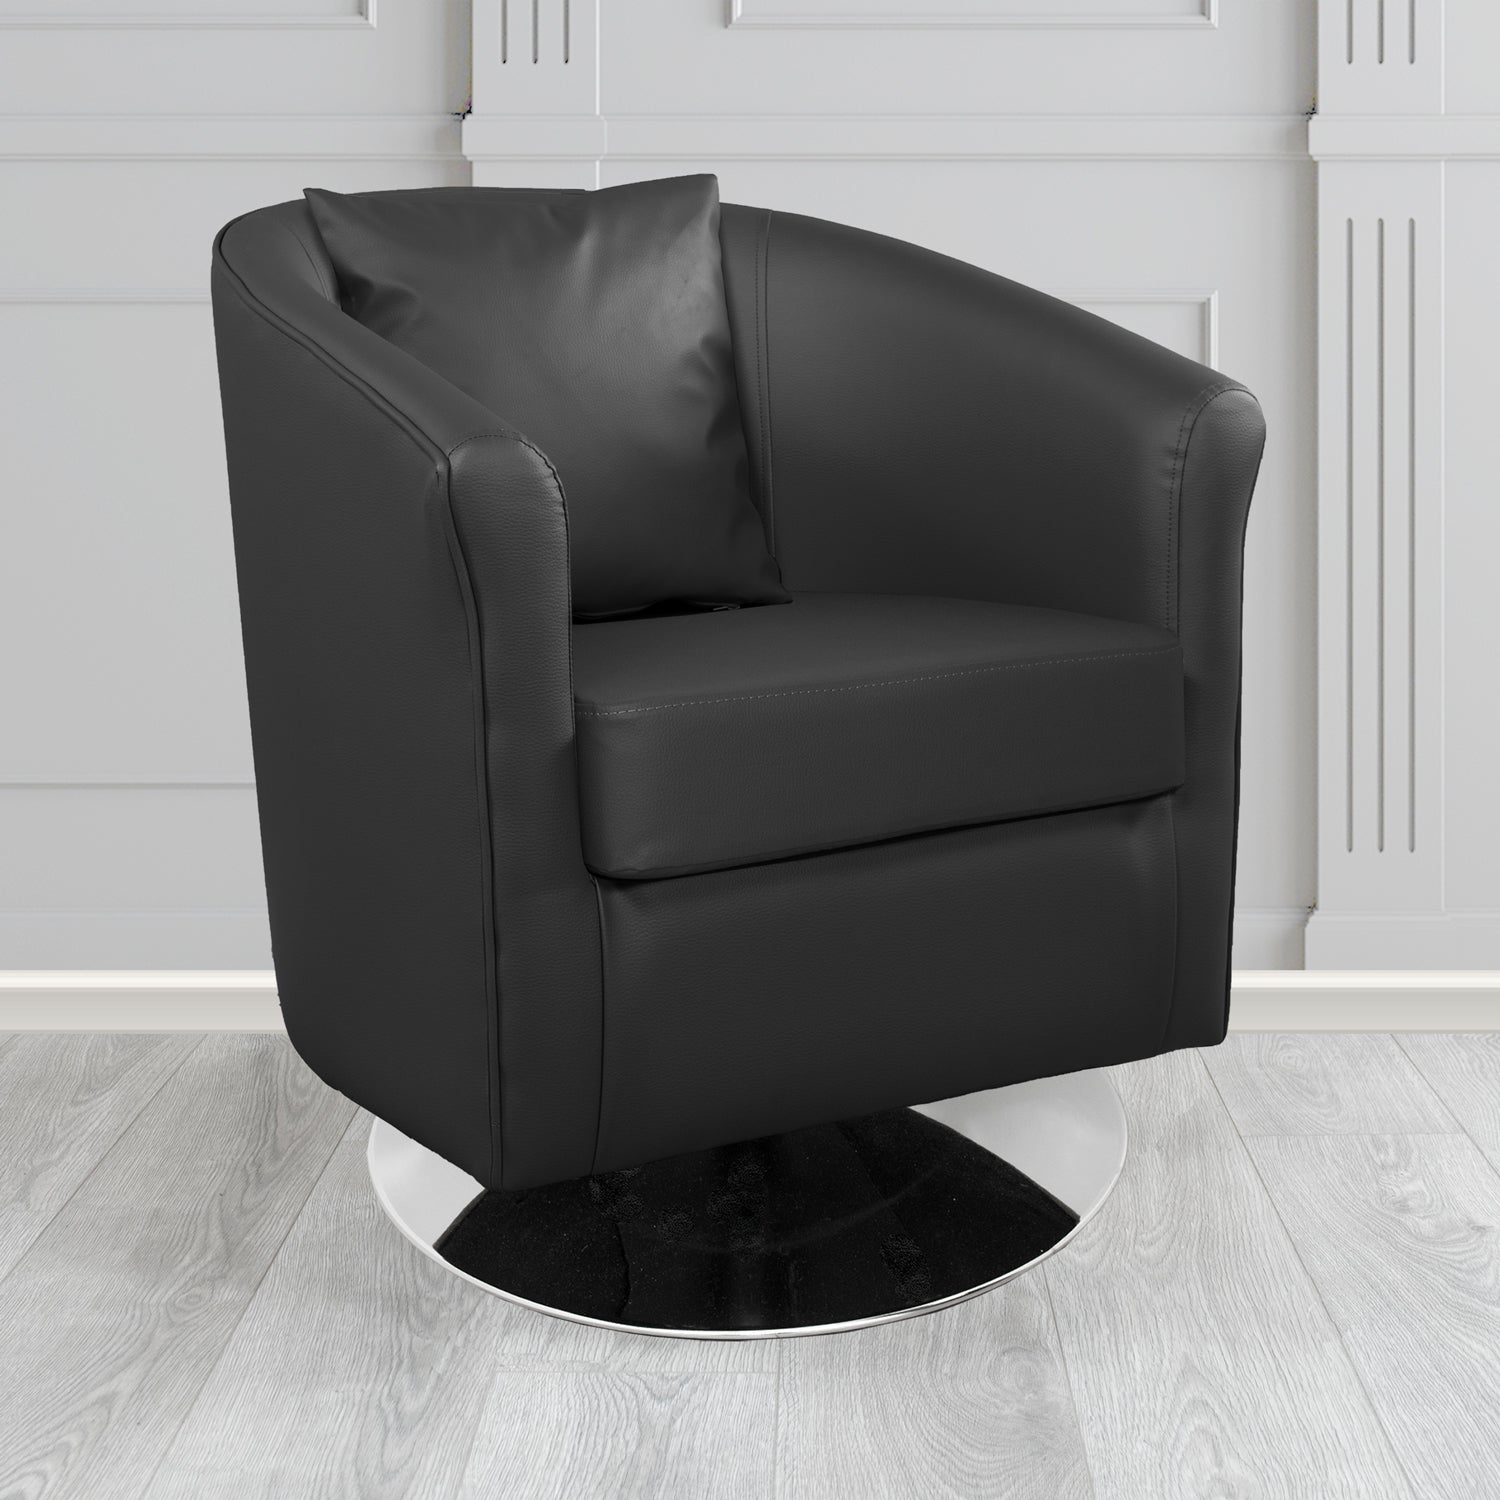 St Tropez Swivel Tub Chair with Scatter Cushion in Madrid Black Faux Leather